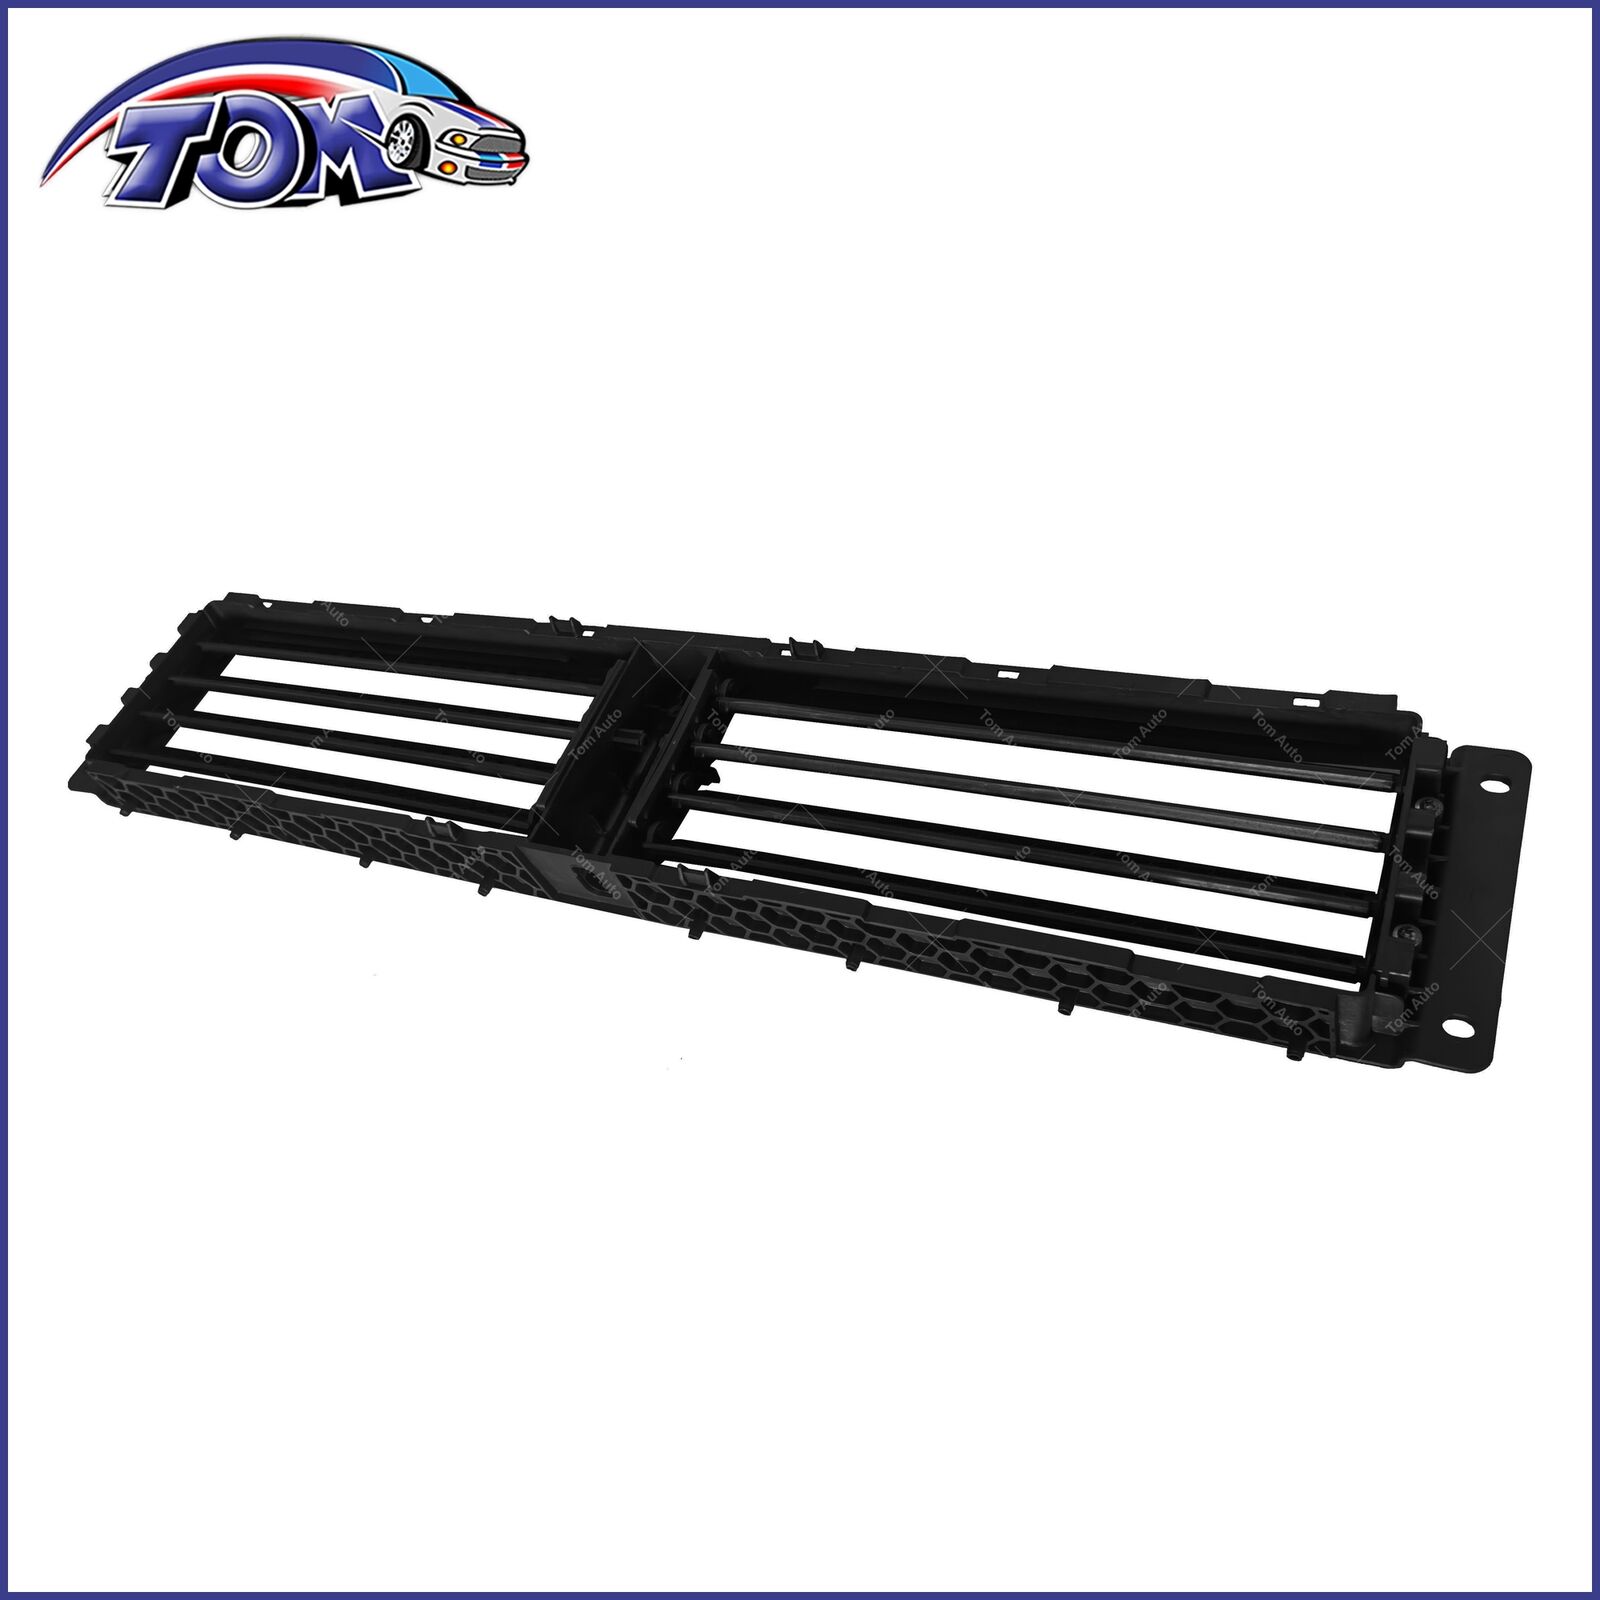 Grille Air Intake Shutter Front Bumper Grille-Shutter For Chevrolet Malibu Buick